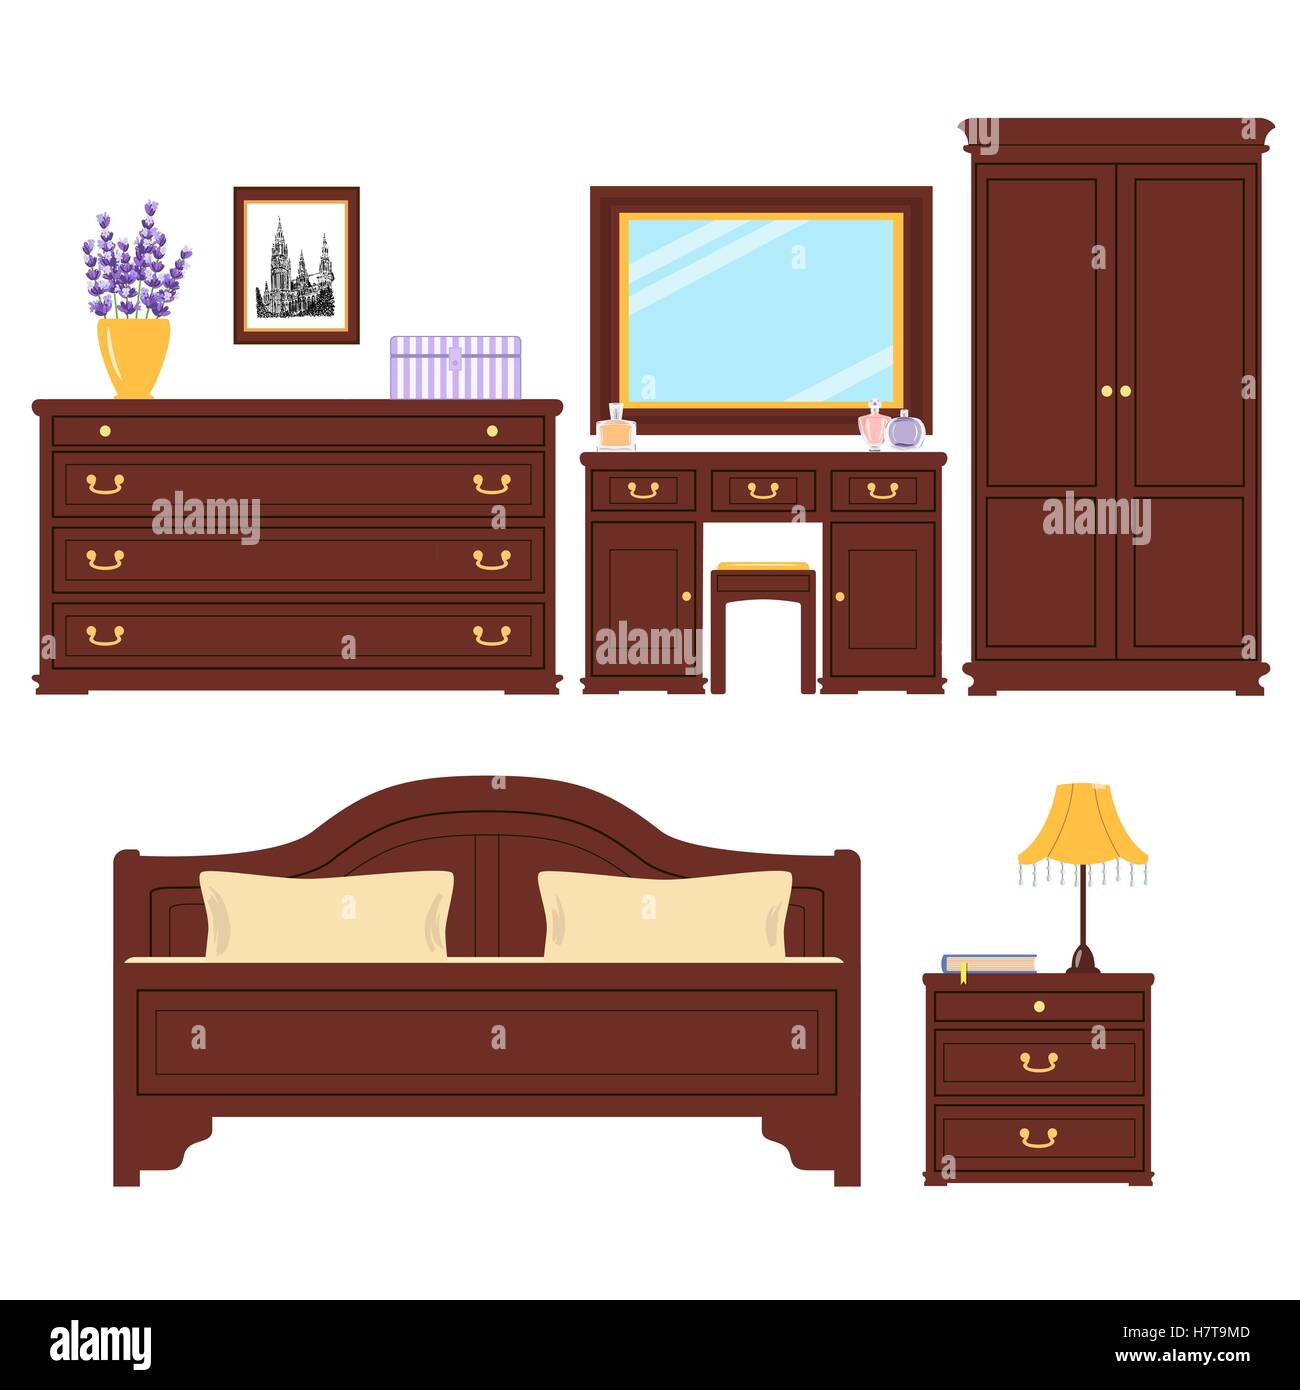 Set of Furniture for bedroom. Cute sleeping room. For advertising, real estate image, furniture shop. Bed, picture, chest of dra Stock Vector